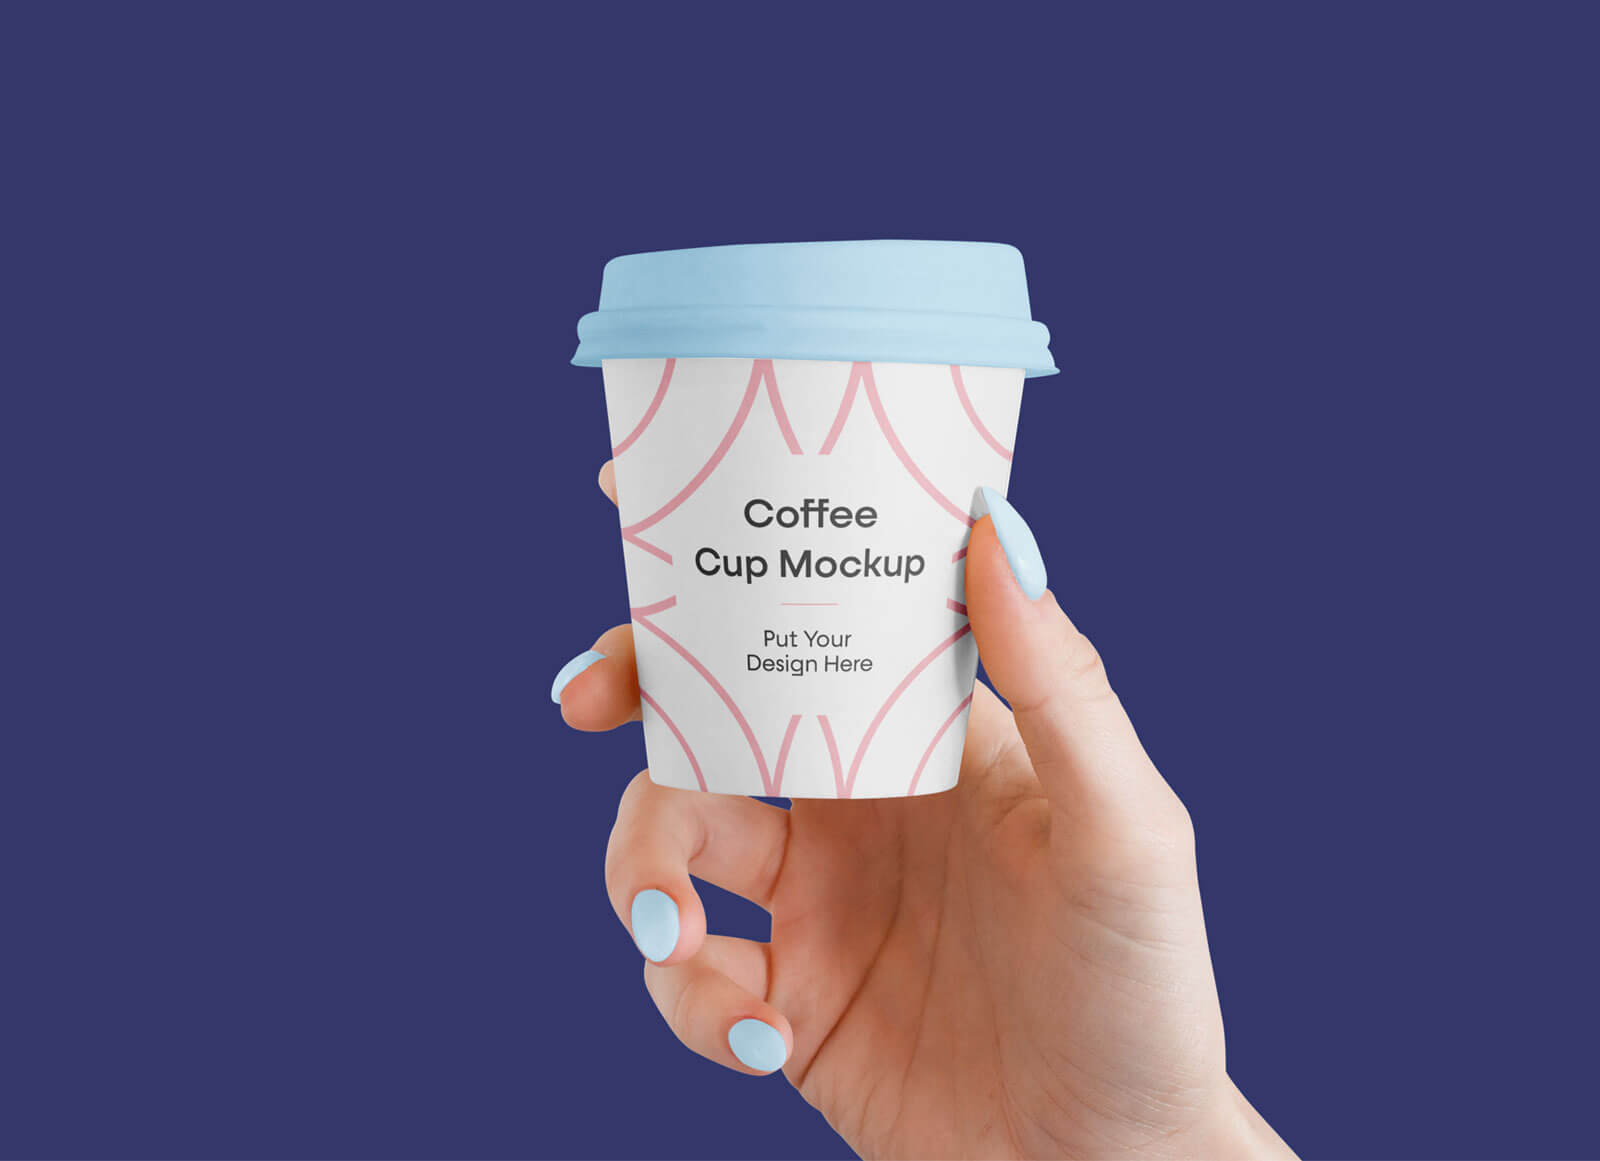 Free-Hand-Holding-Small-Coffee-Cup-Mockup-PSD